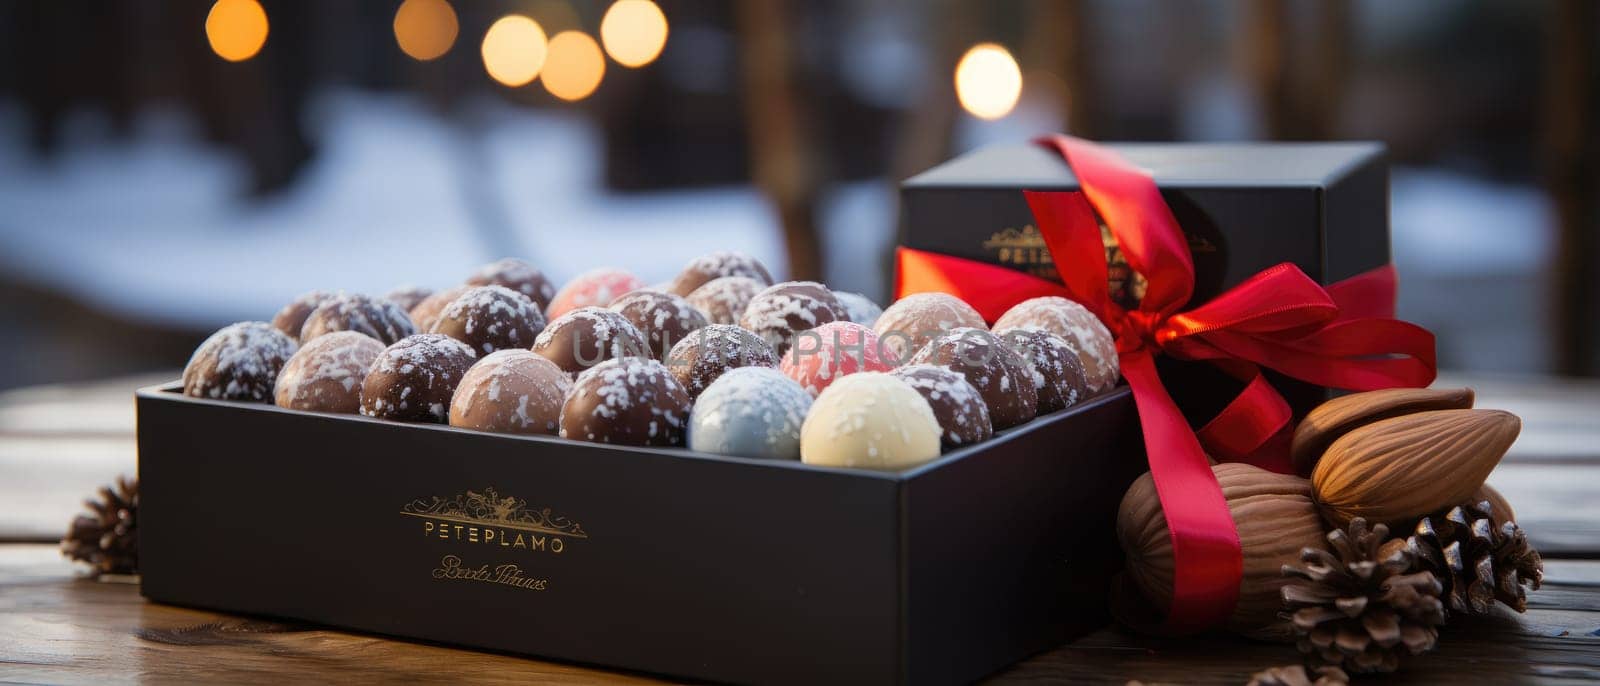 Christmas Sweet: Chocolate Candy Balls by Yurich32